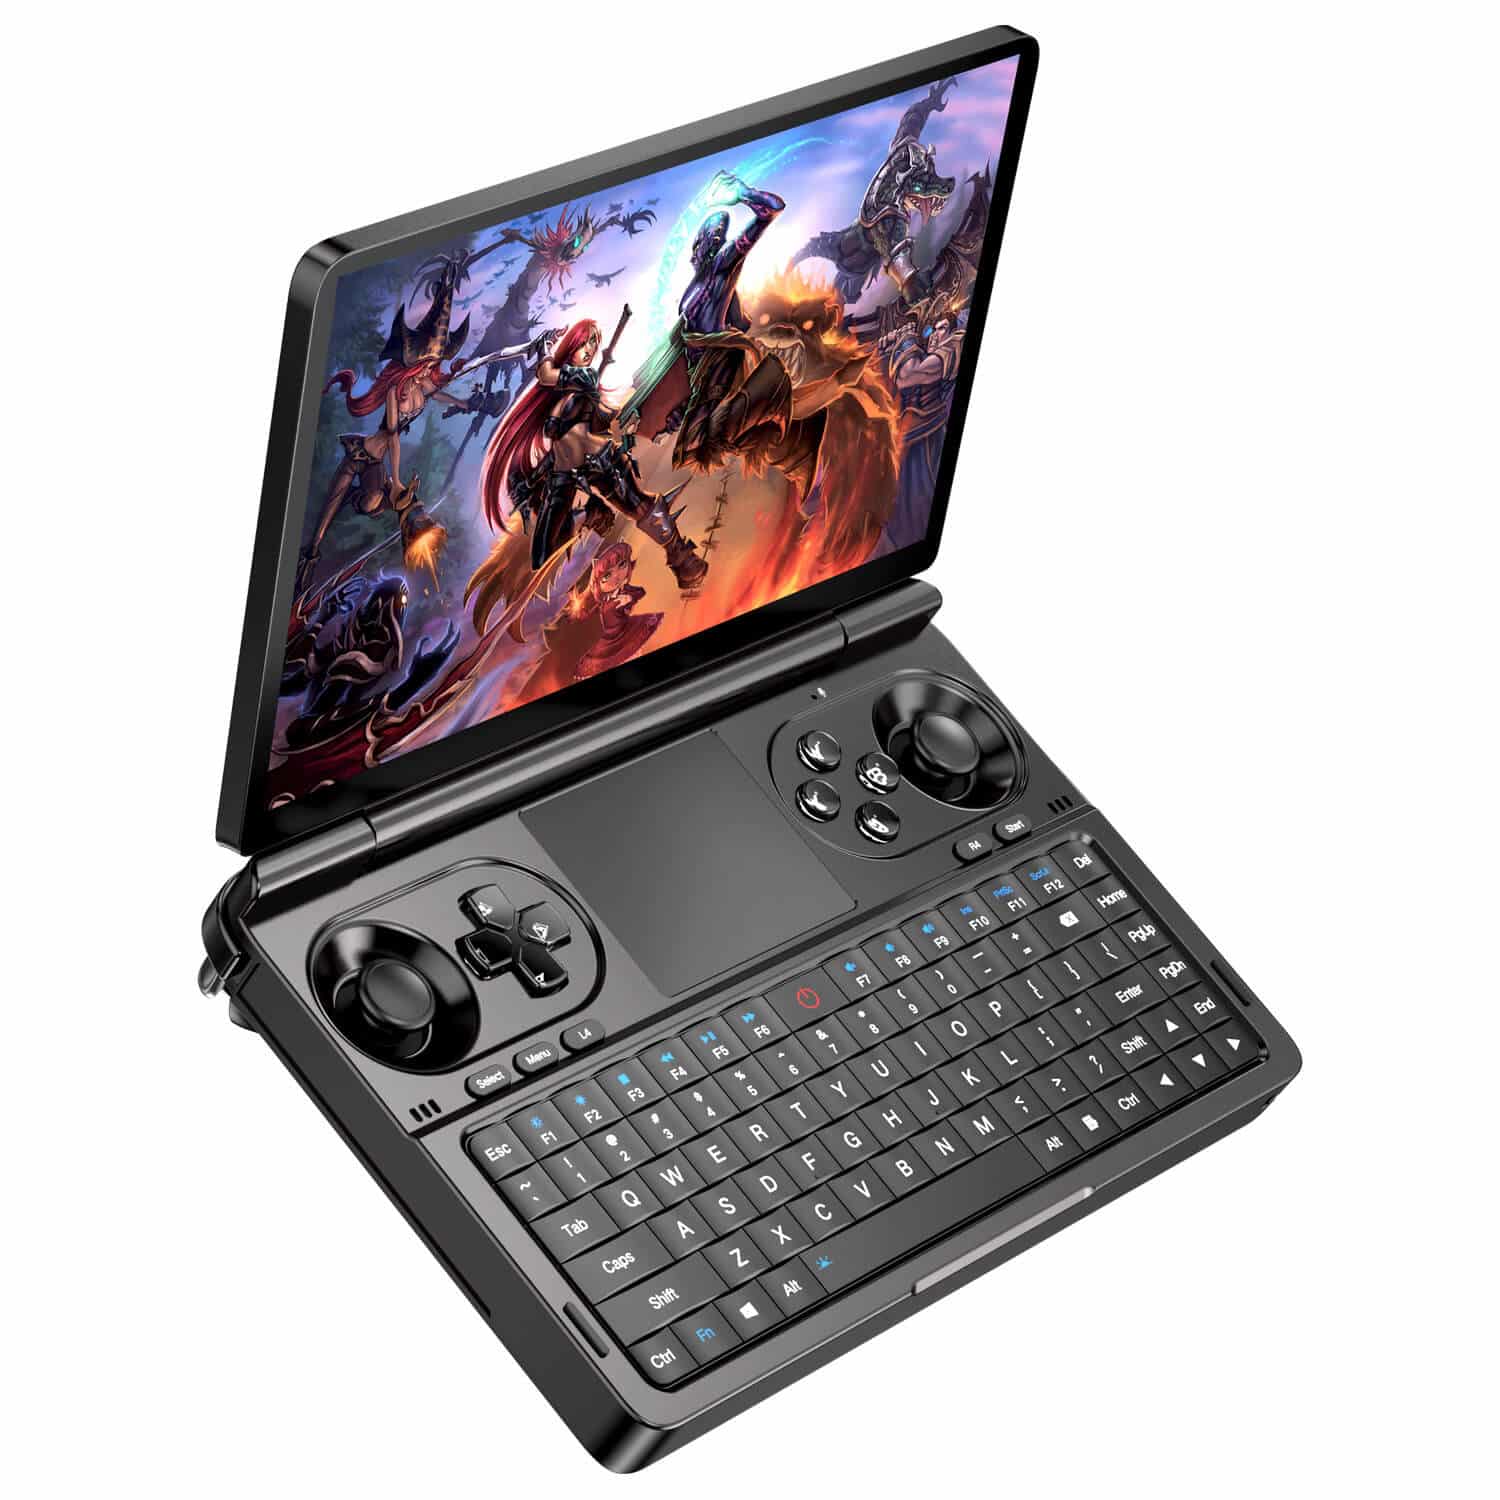 GPD Micro PC industry Mini Laptop with RS232 | DroiX Global